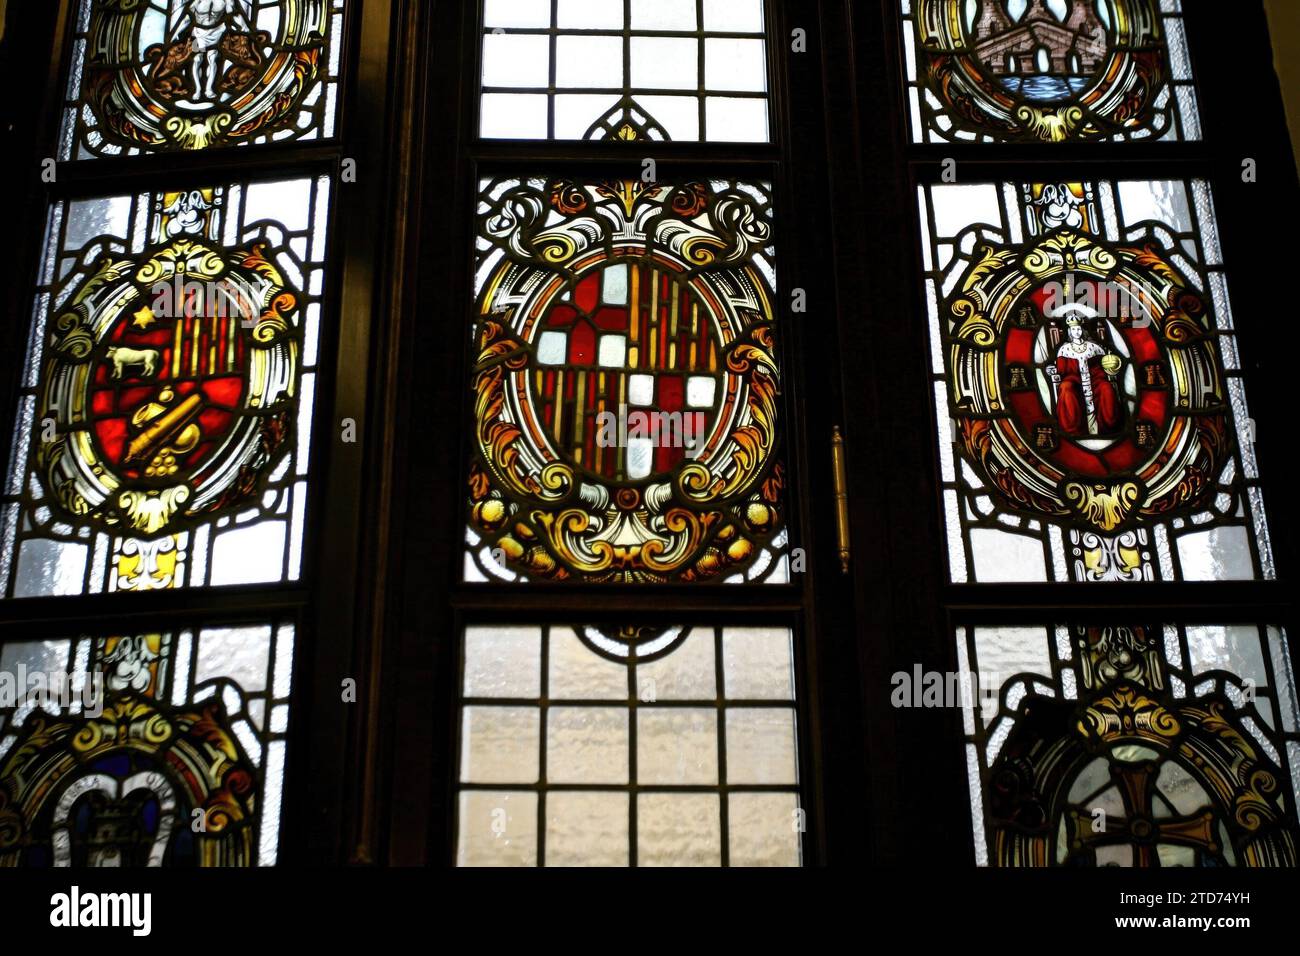 Madrid, 11/05/2007. Stained glass windows of the Madrid City Council with the coats of arms of other Spanish cities. Credit: Album / Archivo ABC / Francisco Seco Stock Photo